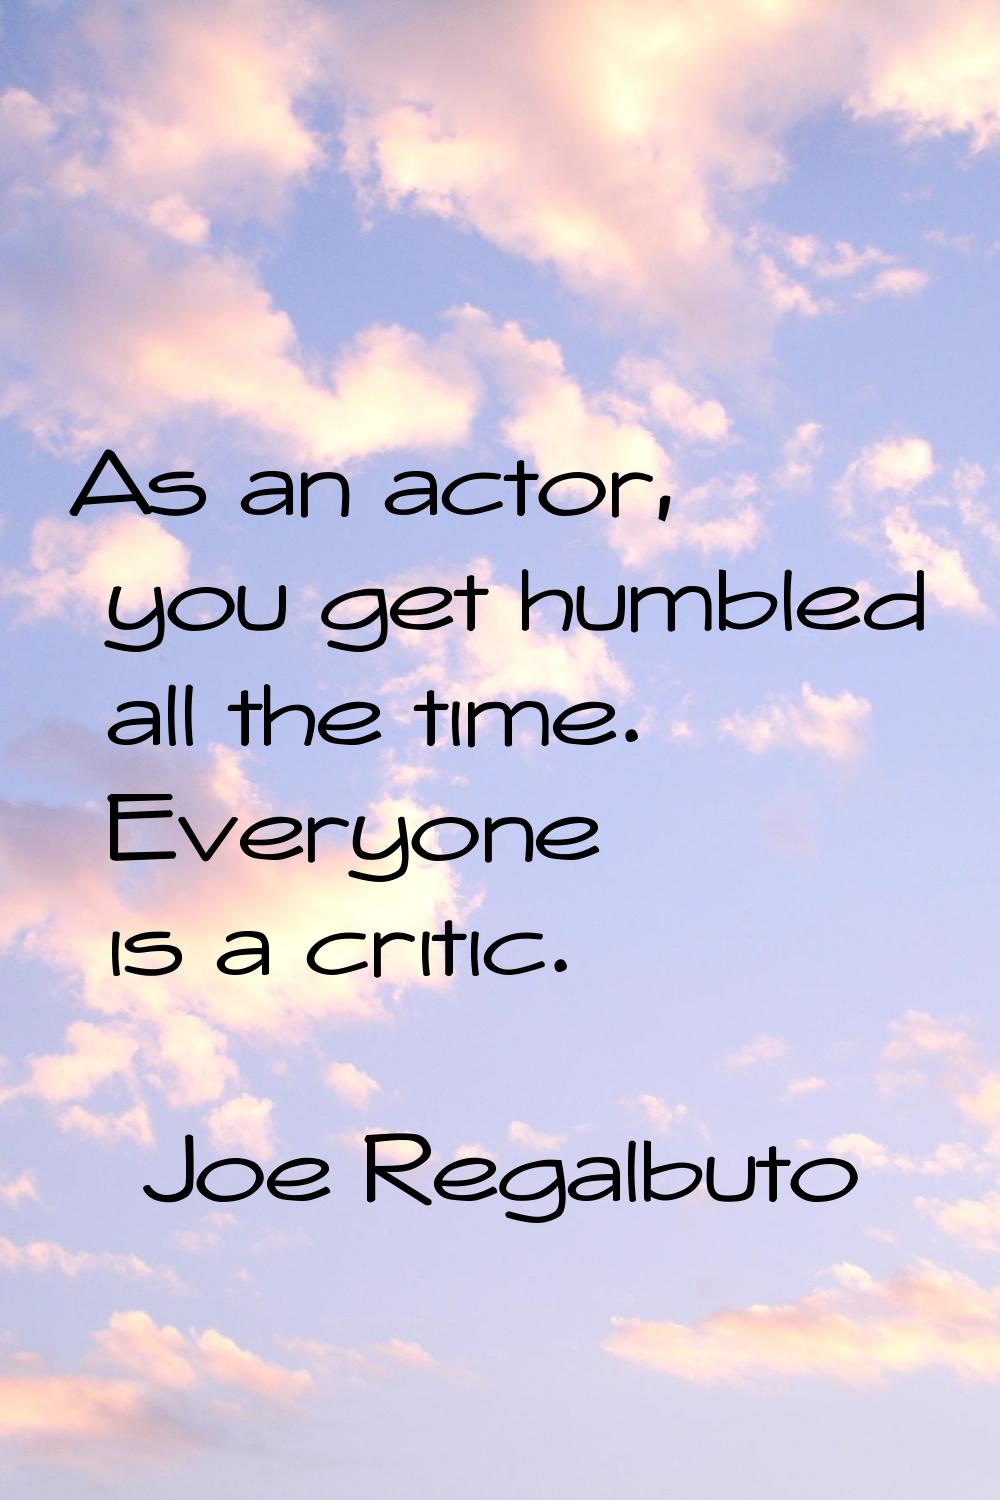 As an actor, you get humbled all the time. Everyone is a critic.